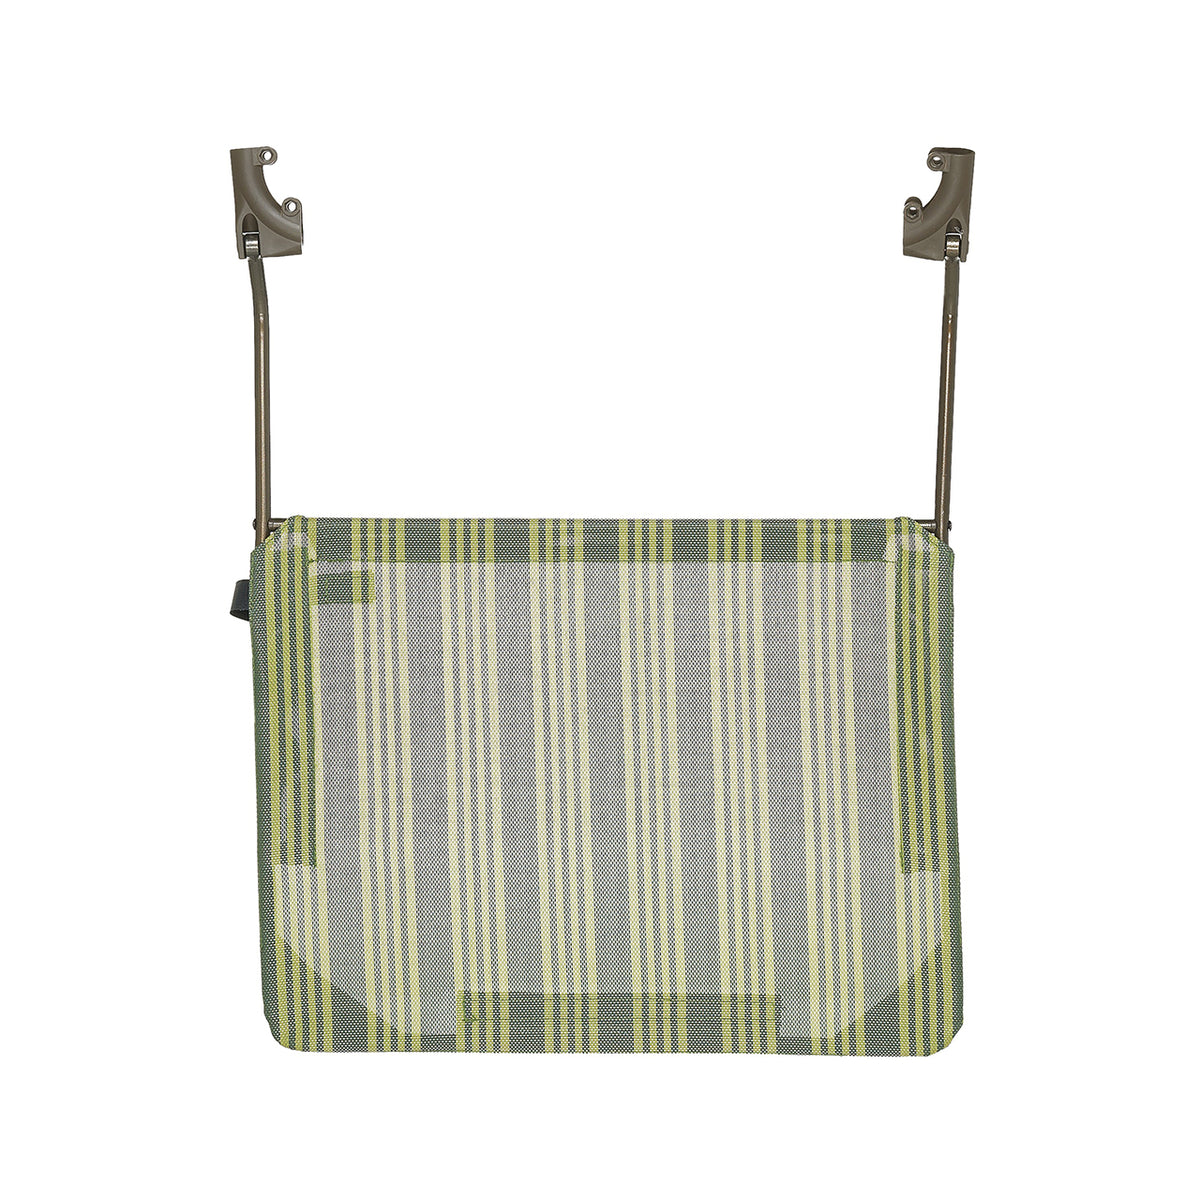 Bliss Hammocks Canopy for Rocking Chair in the green stripe variation.